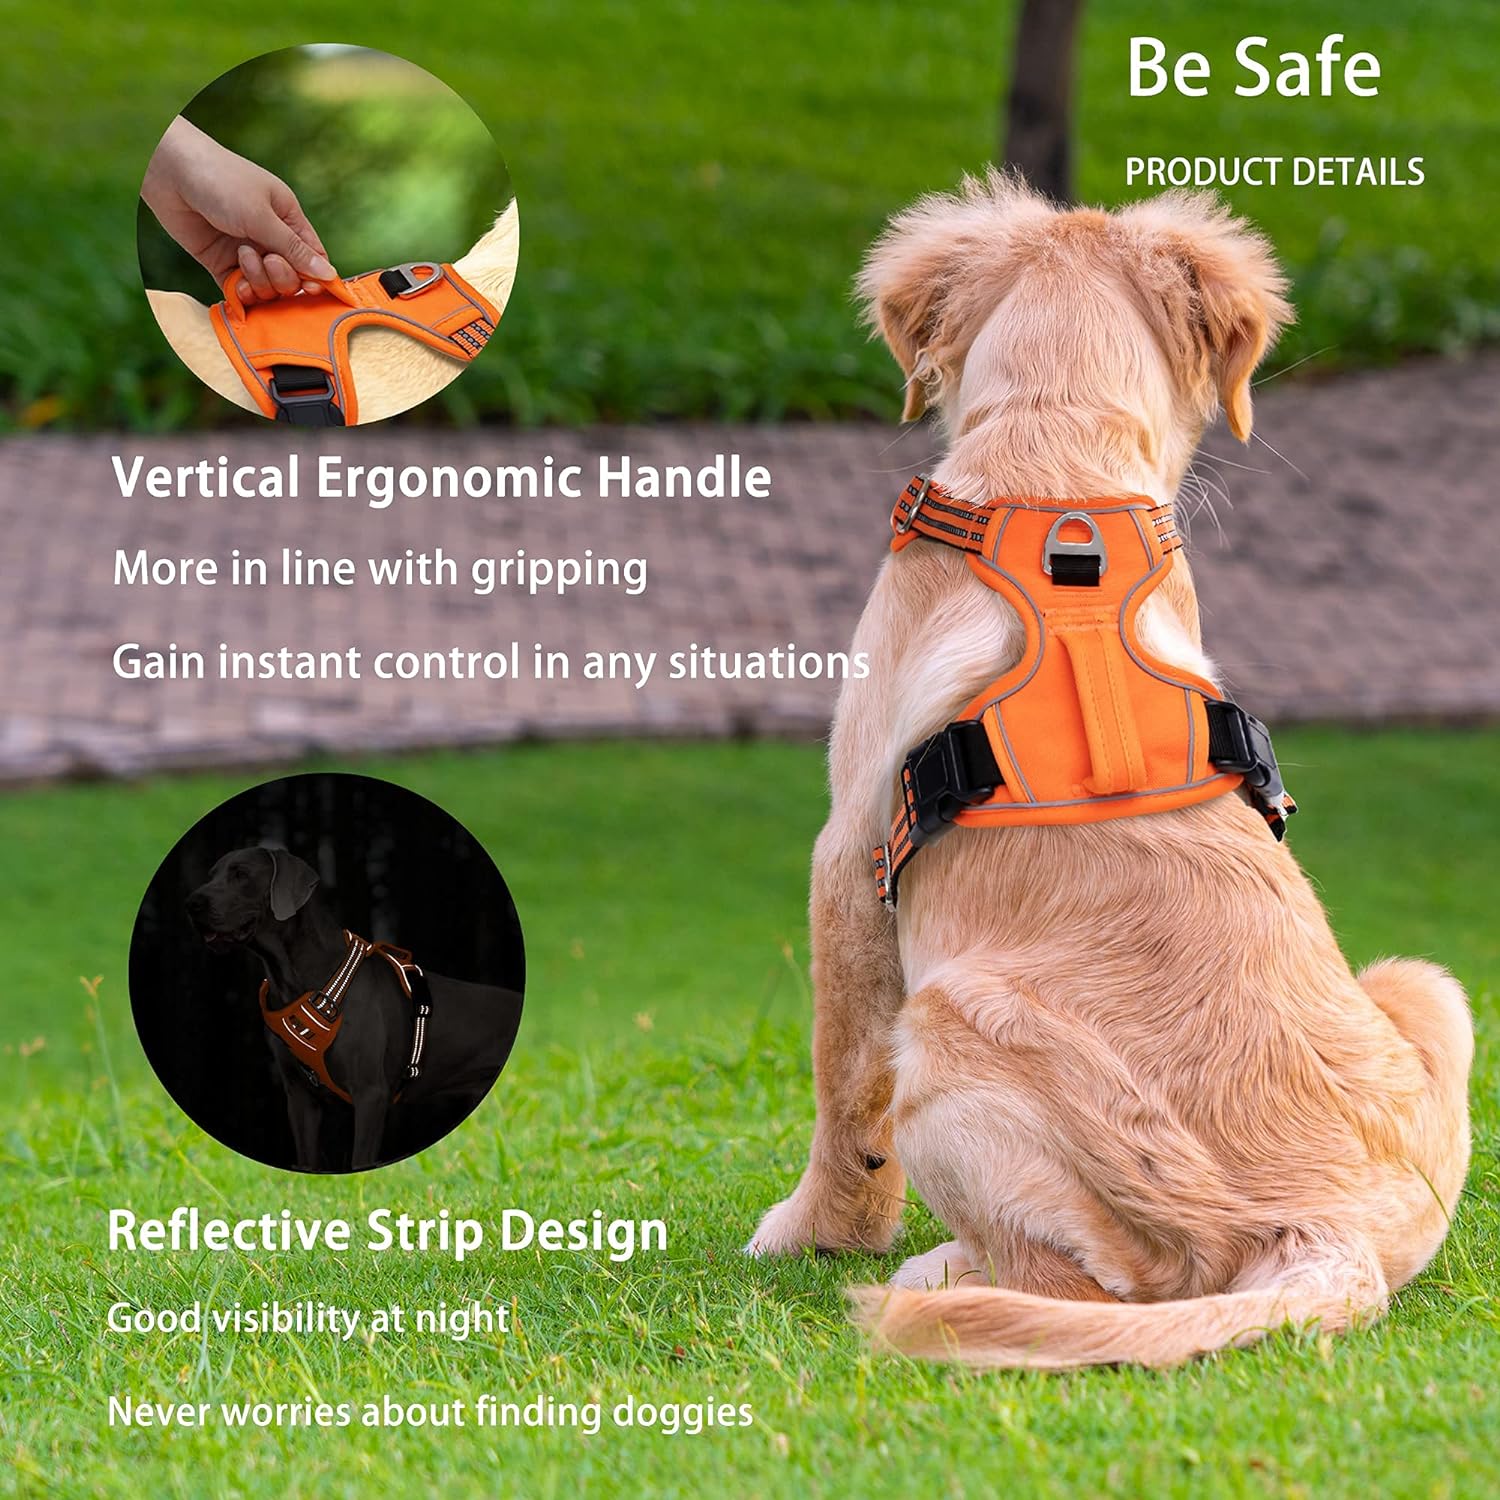 Funfox Dog Harness Large No Pull Pet Harness, Adjustable Dog Vest for Easy Walking, Breathable Oxford Material, Reflective Strips with Metal Front Clip for Control Large Breed Dogs